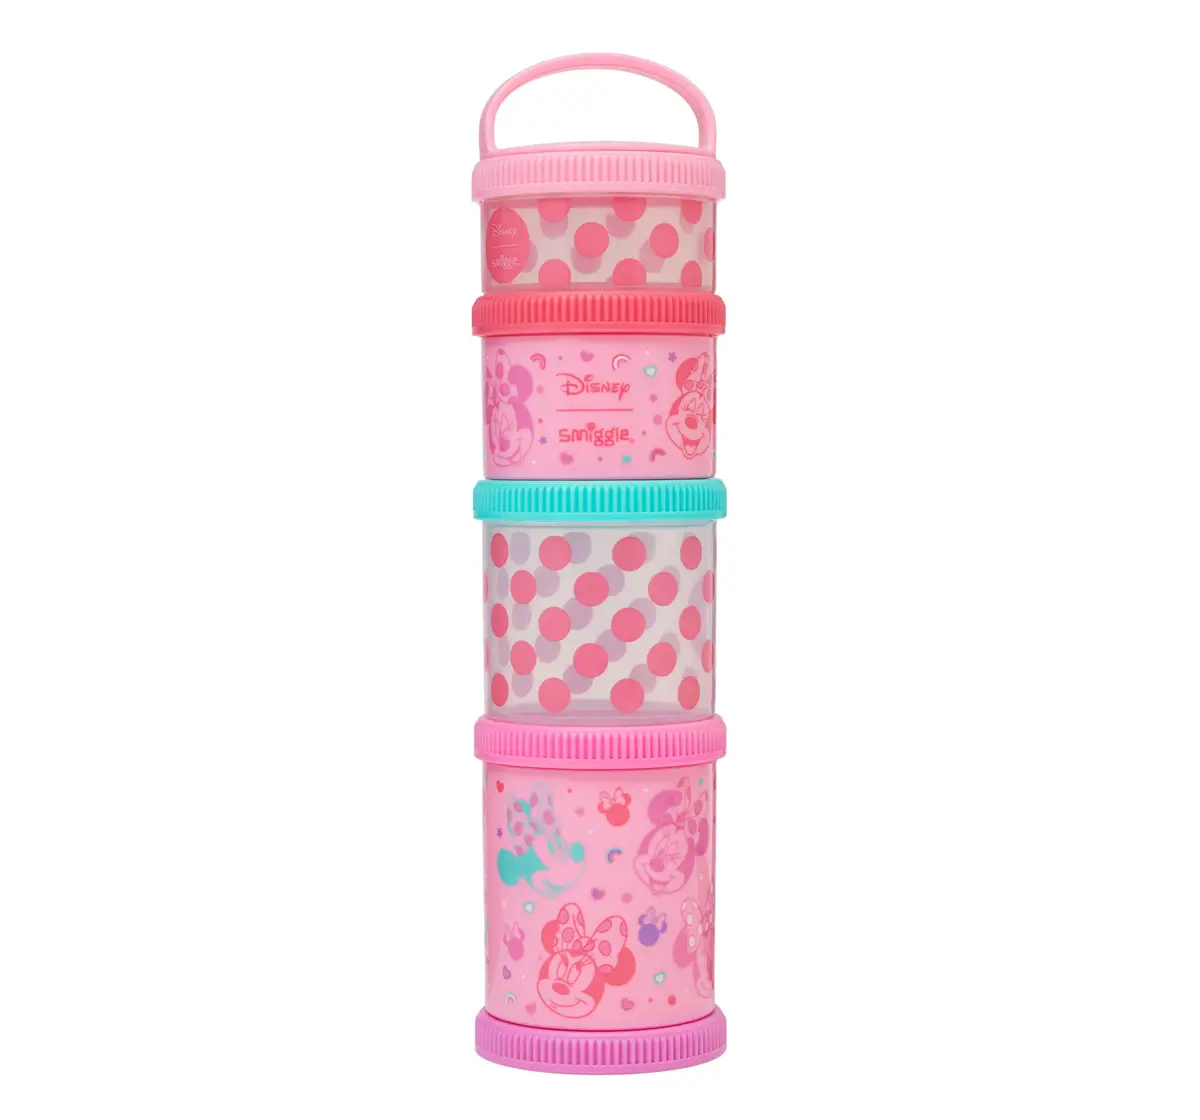 Smiggle Minnie Mouse Stackable Containers set of 4, Pink, 3Y+